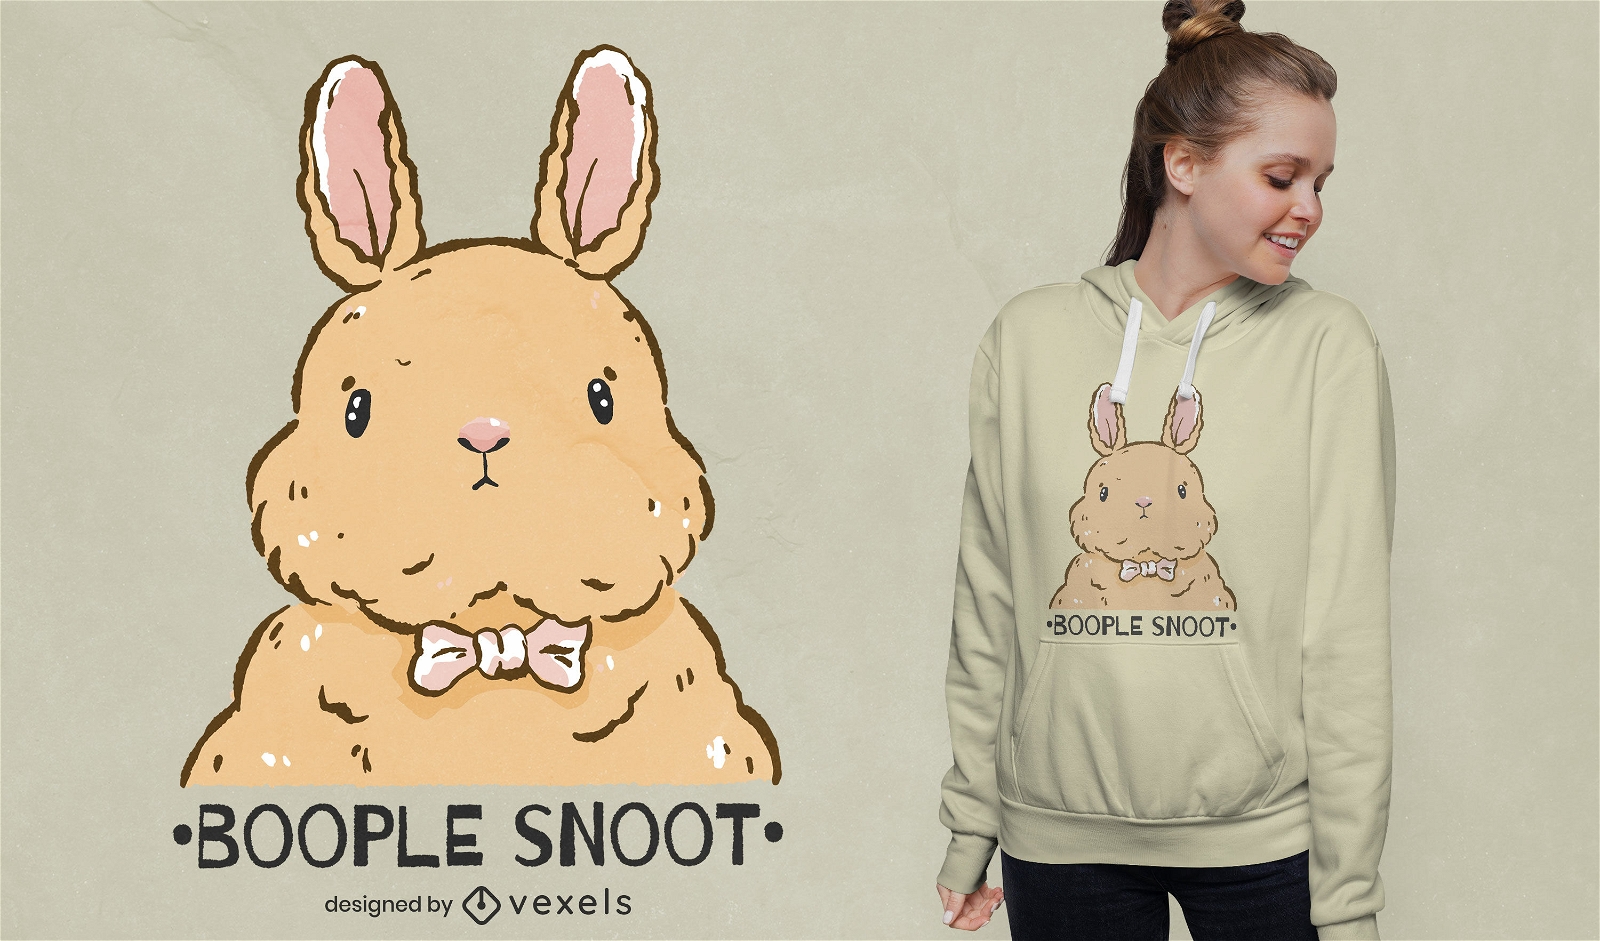 Cute rabbit with bow tie t-shirt design